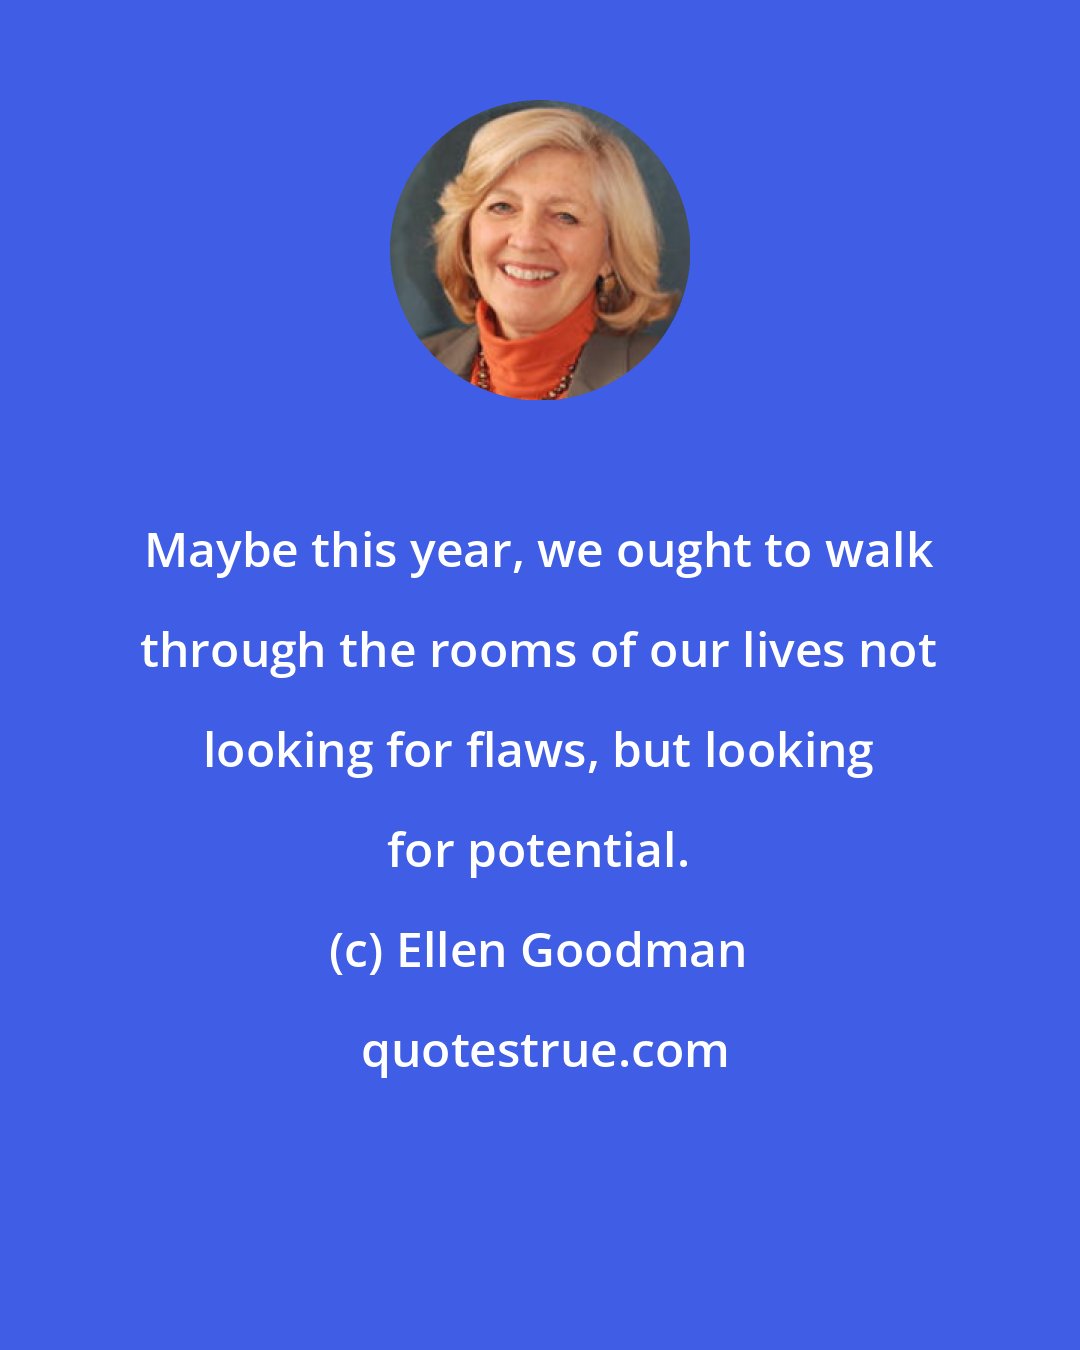 Ellen Goodman: Maybe this year, we ought to walk through the rooms of our lives not looking for flaws, but looking for potential.